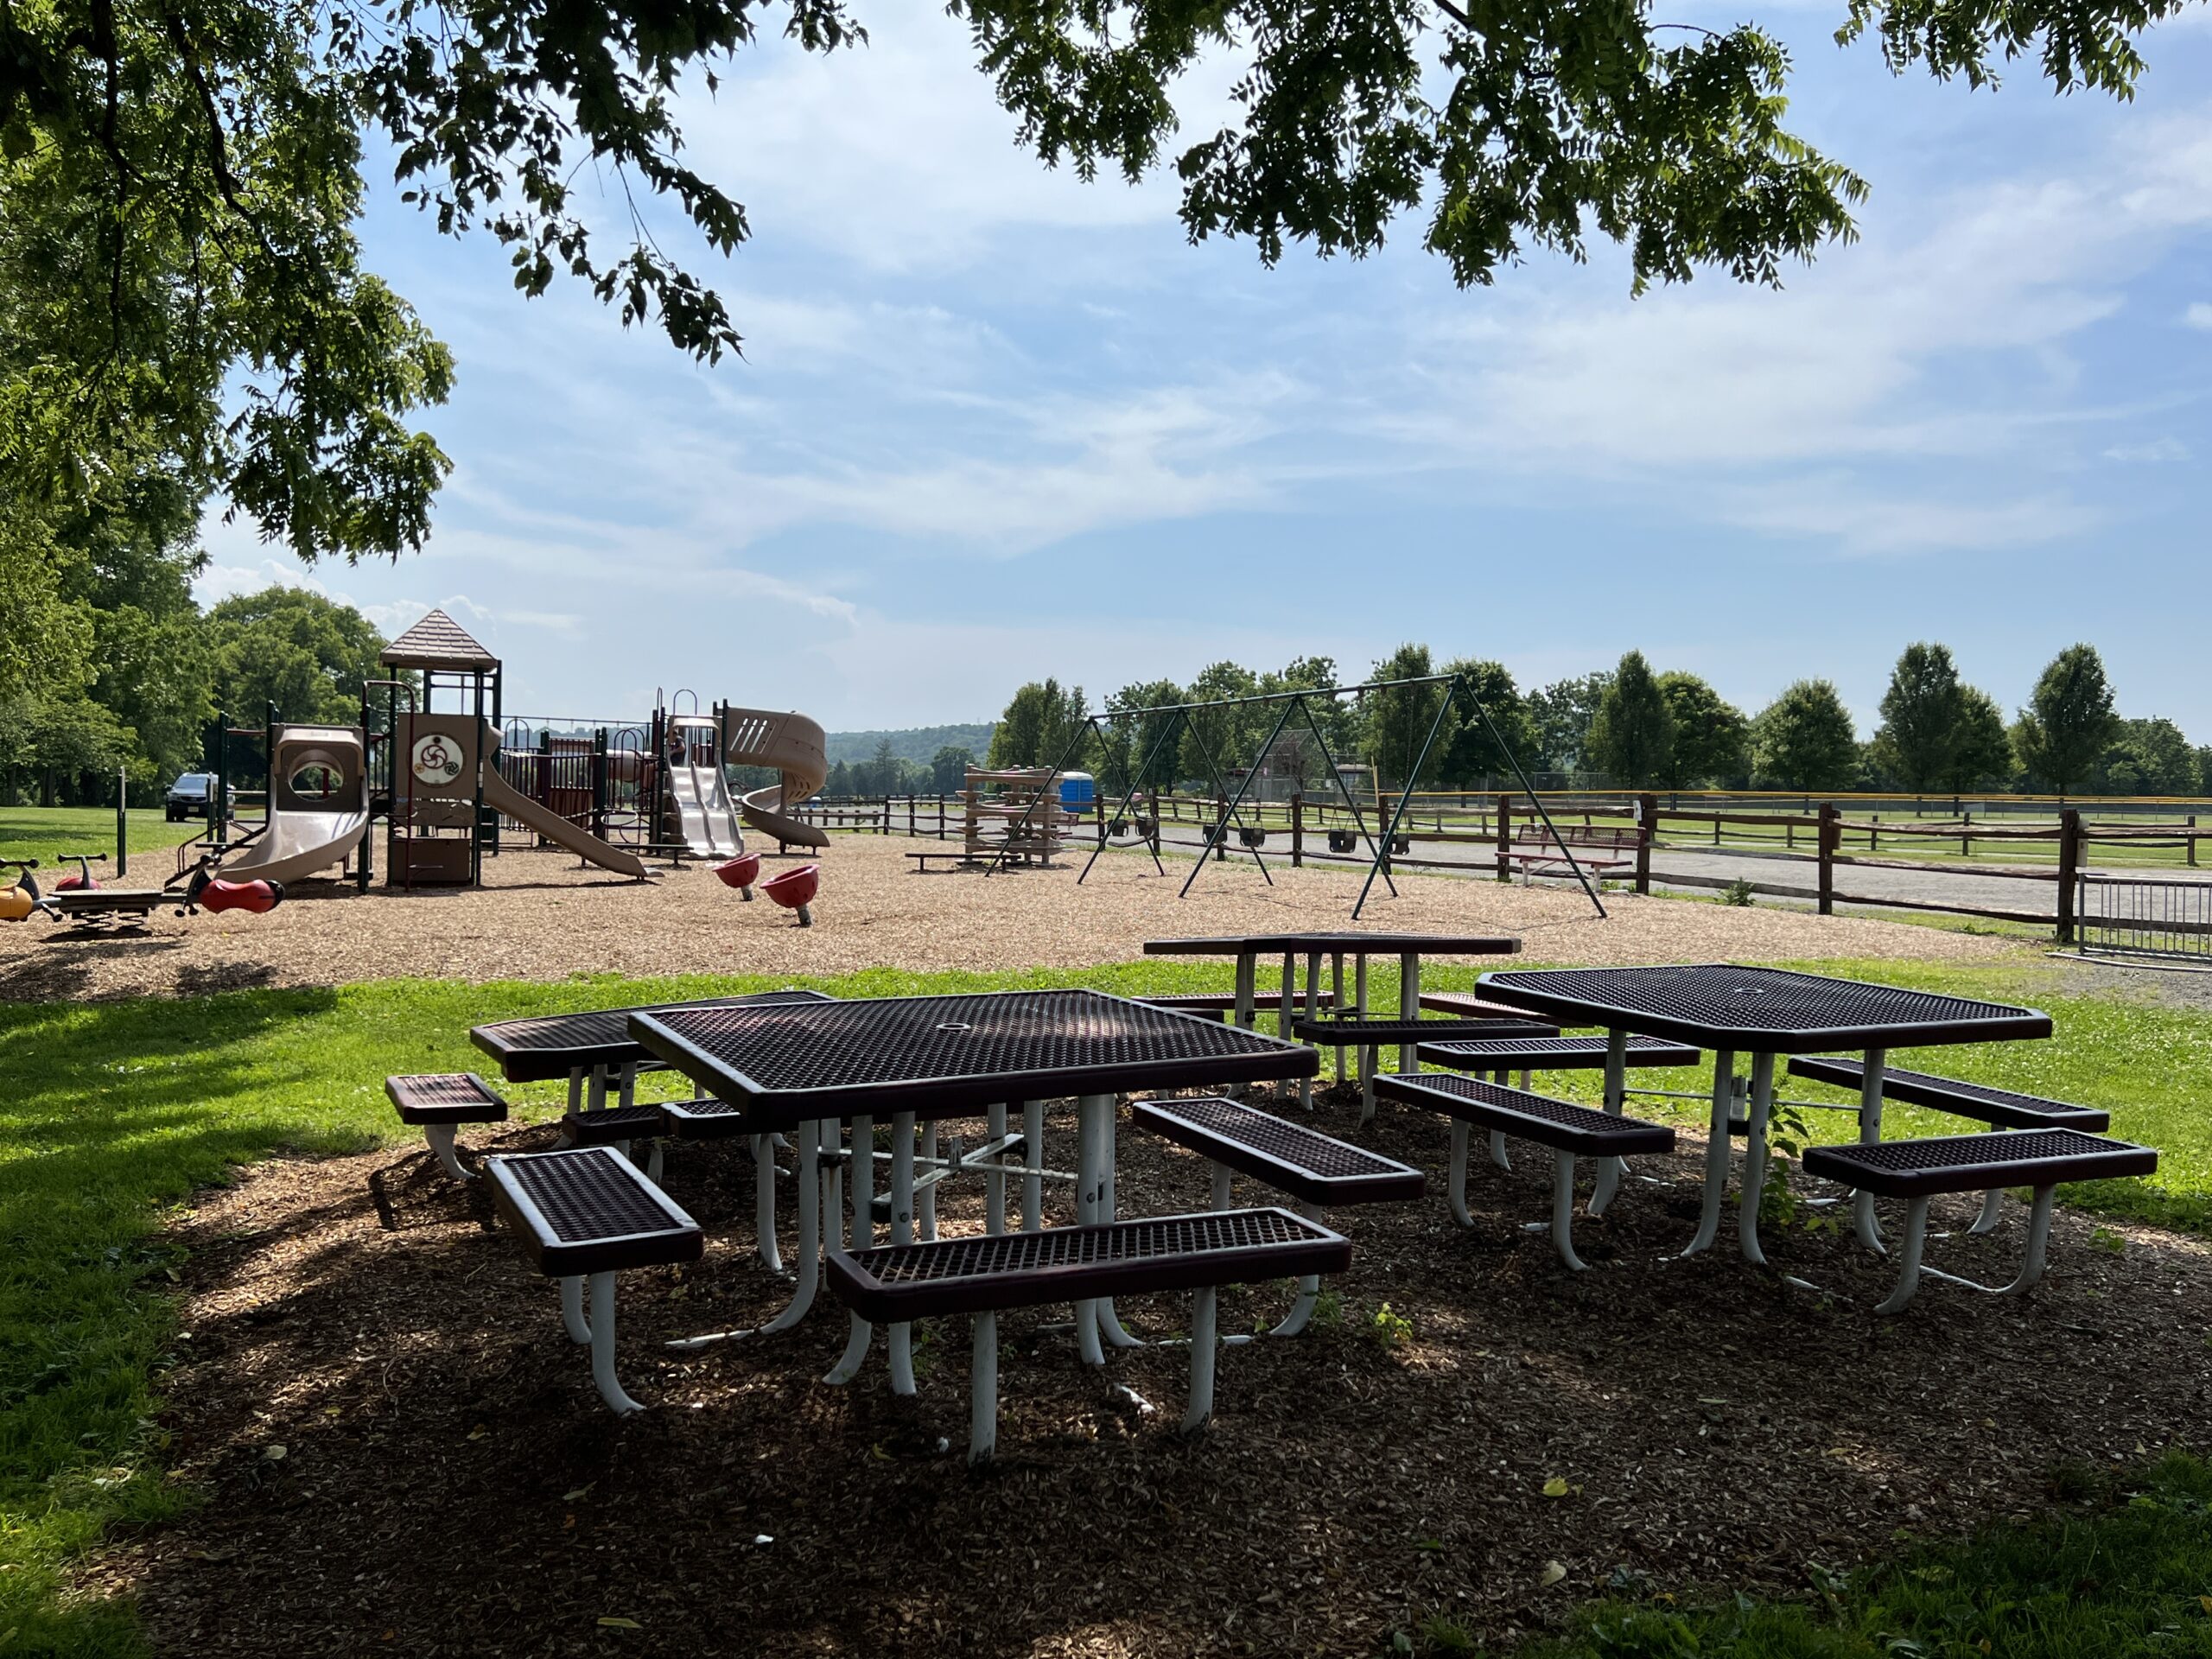 Green Acres Field of Dreams Playground in Independence Township NJ - WIDE image - playground with picnic tables Pavilion end (best shot)